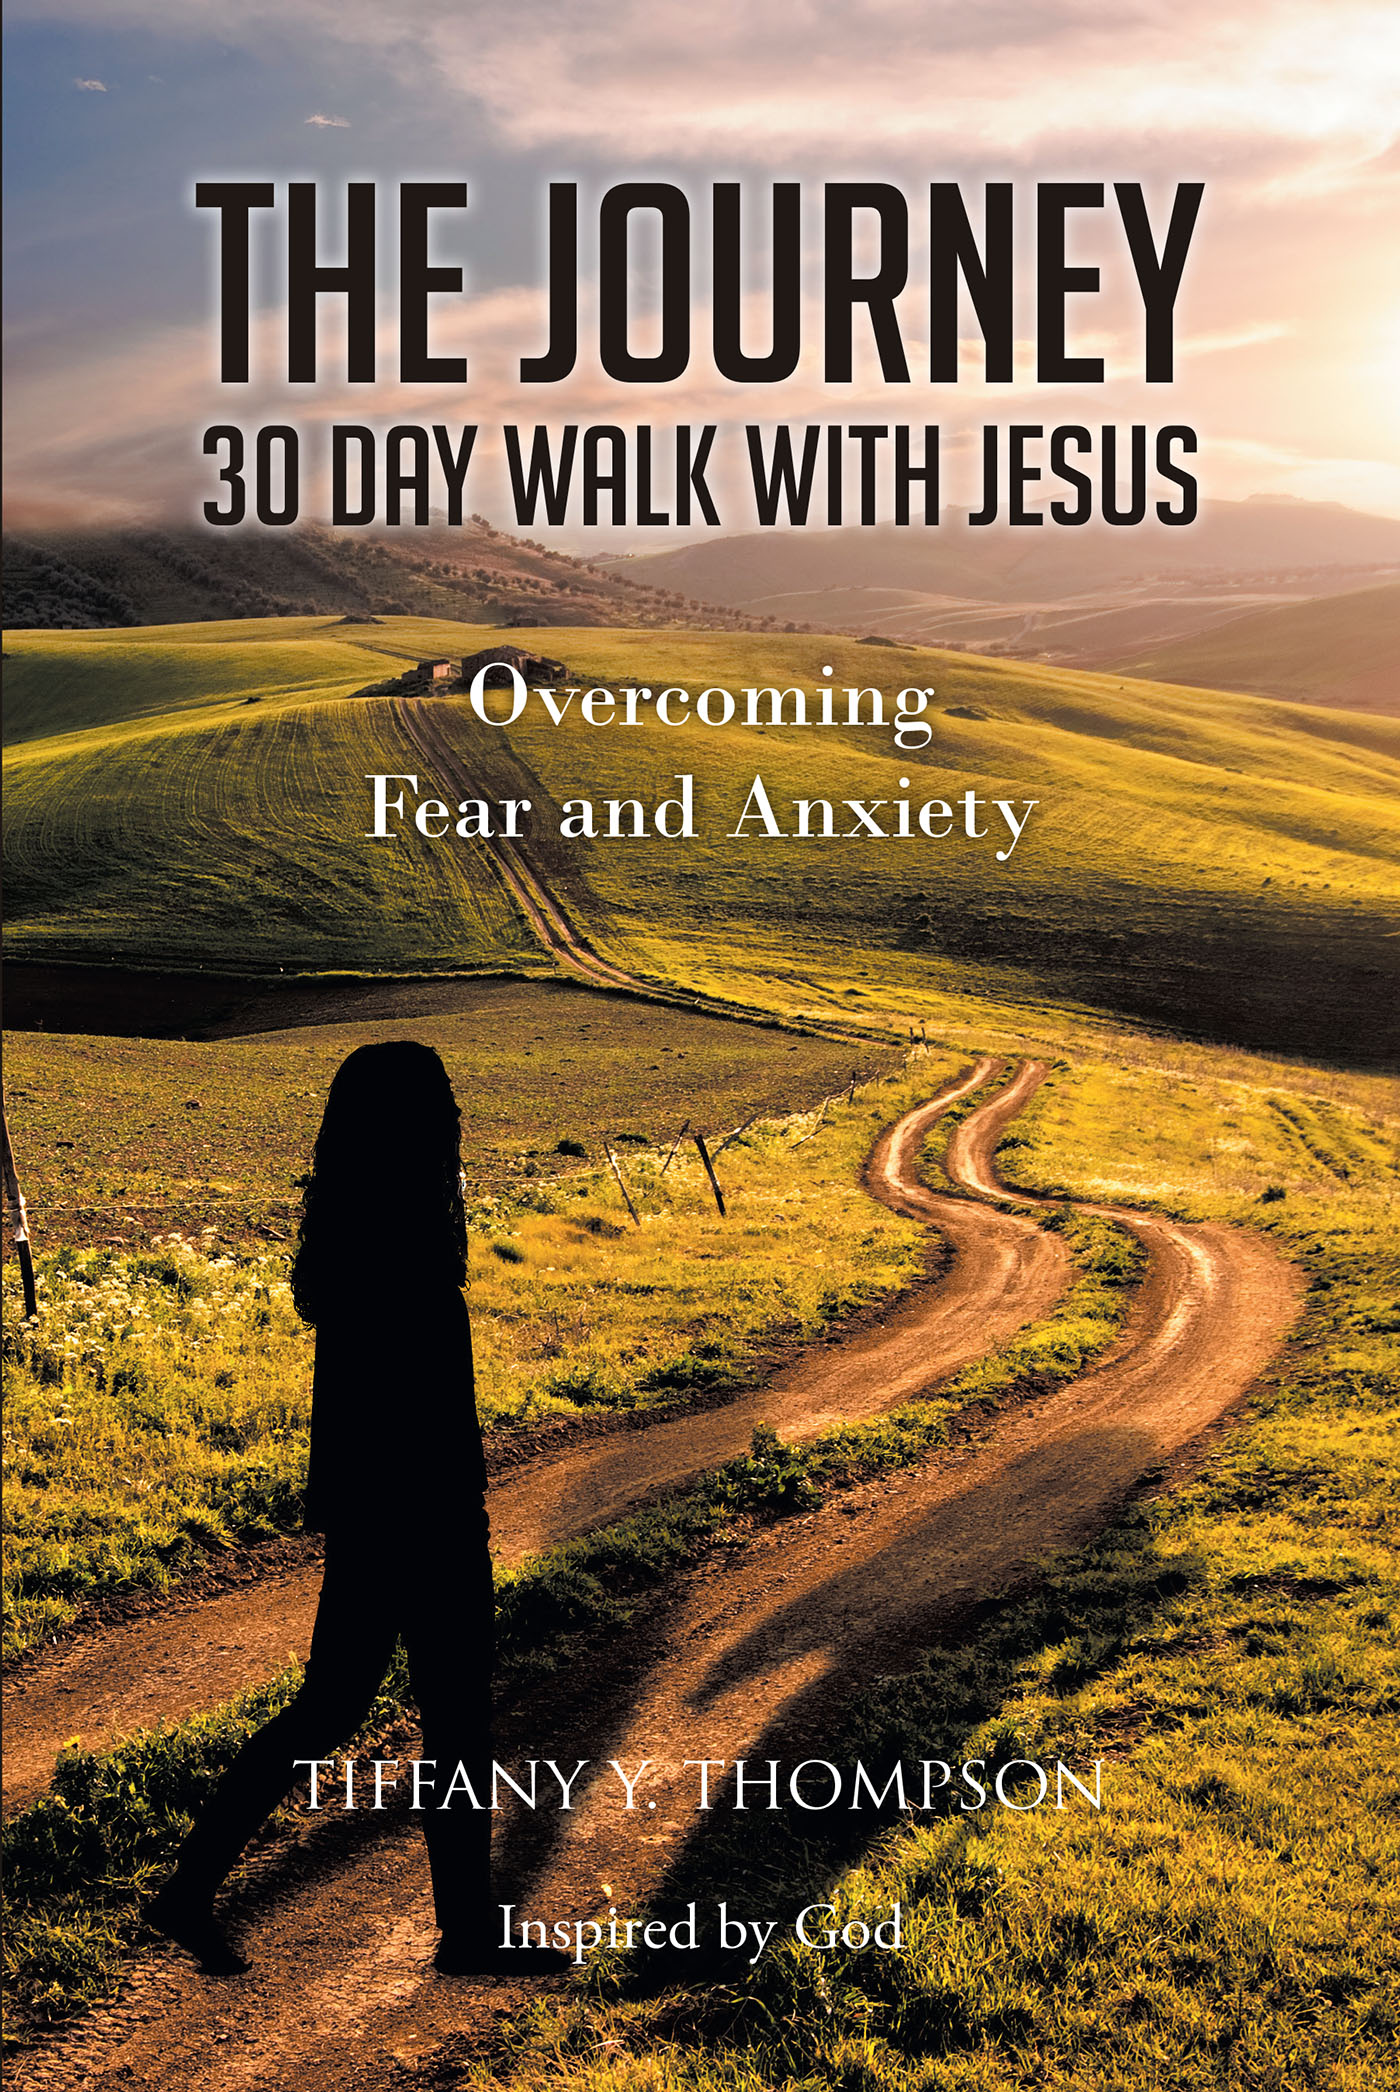 Tiffany Y. Thompson’s Newly Released “The Journey: 30 Day Walk with Jesus: Overcoming Fear and Anxiety,” is an Empowering Opportunity for Challenging Oneself